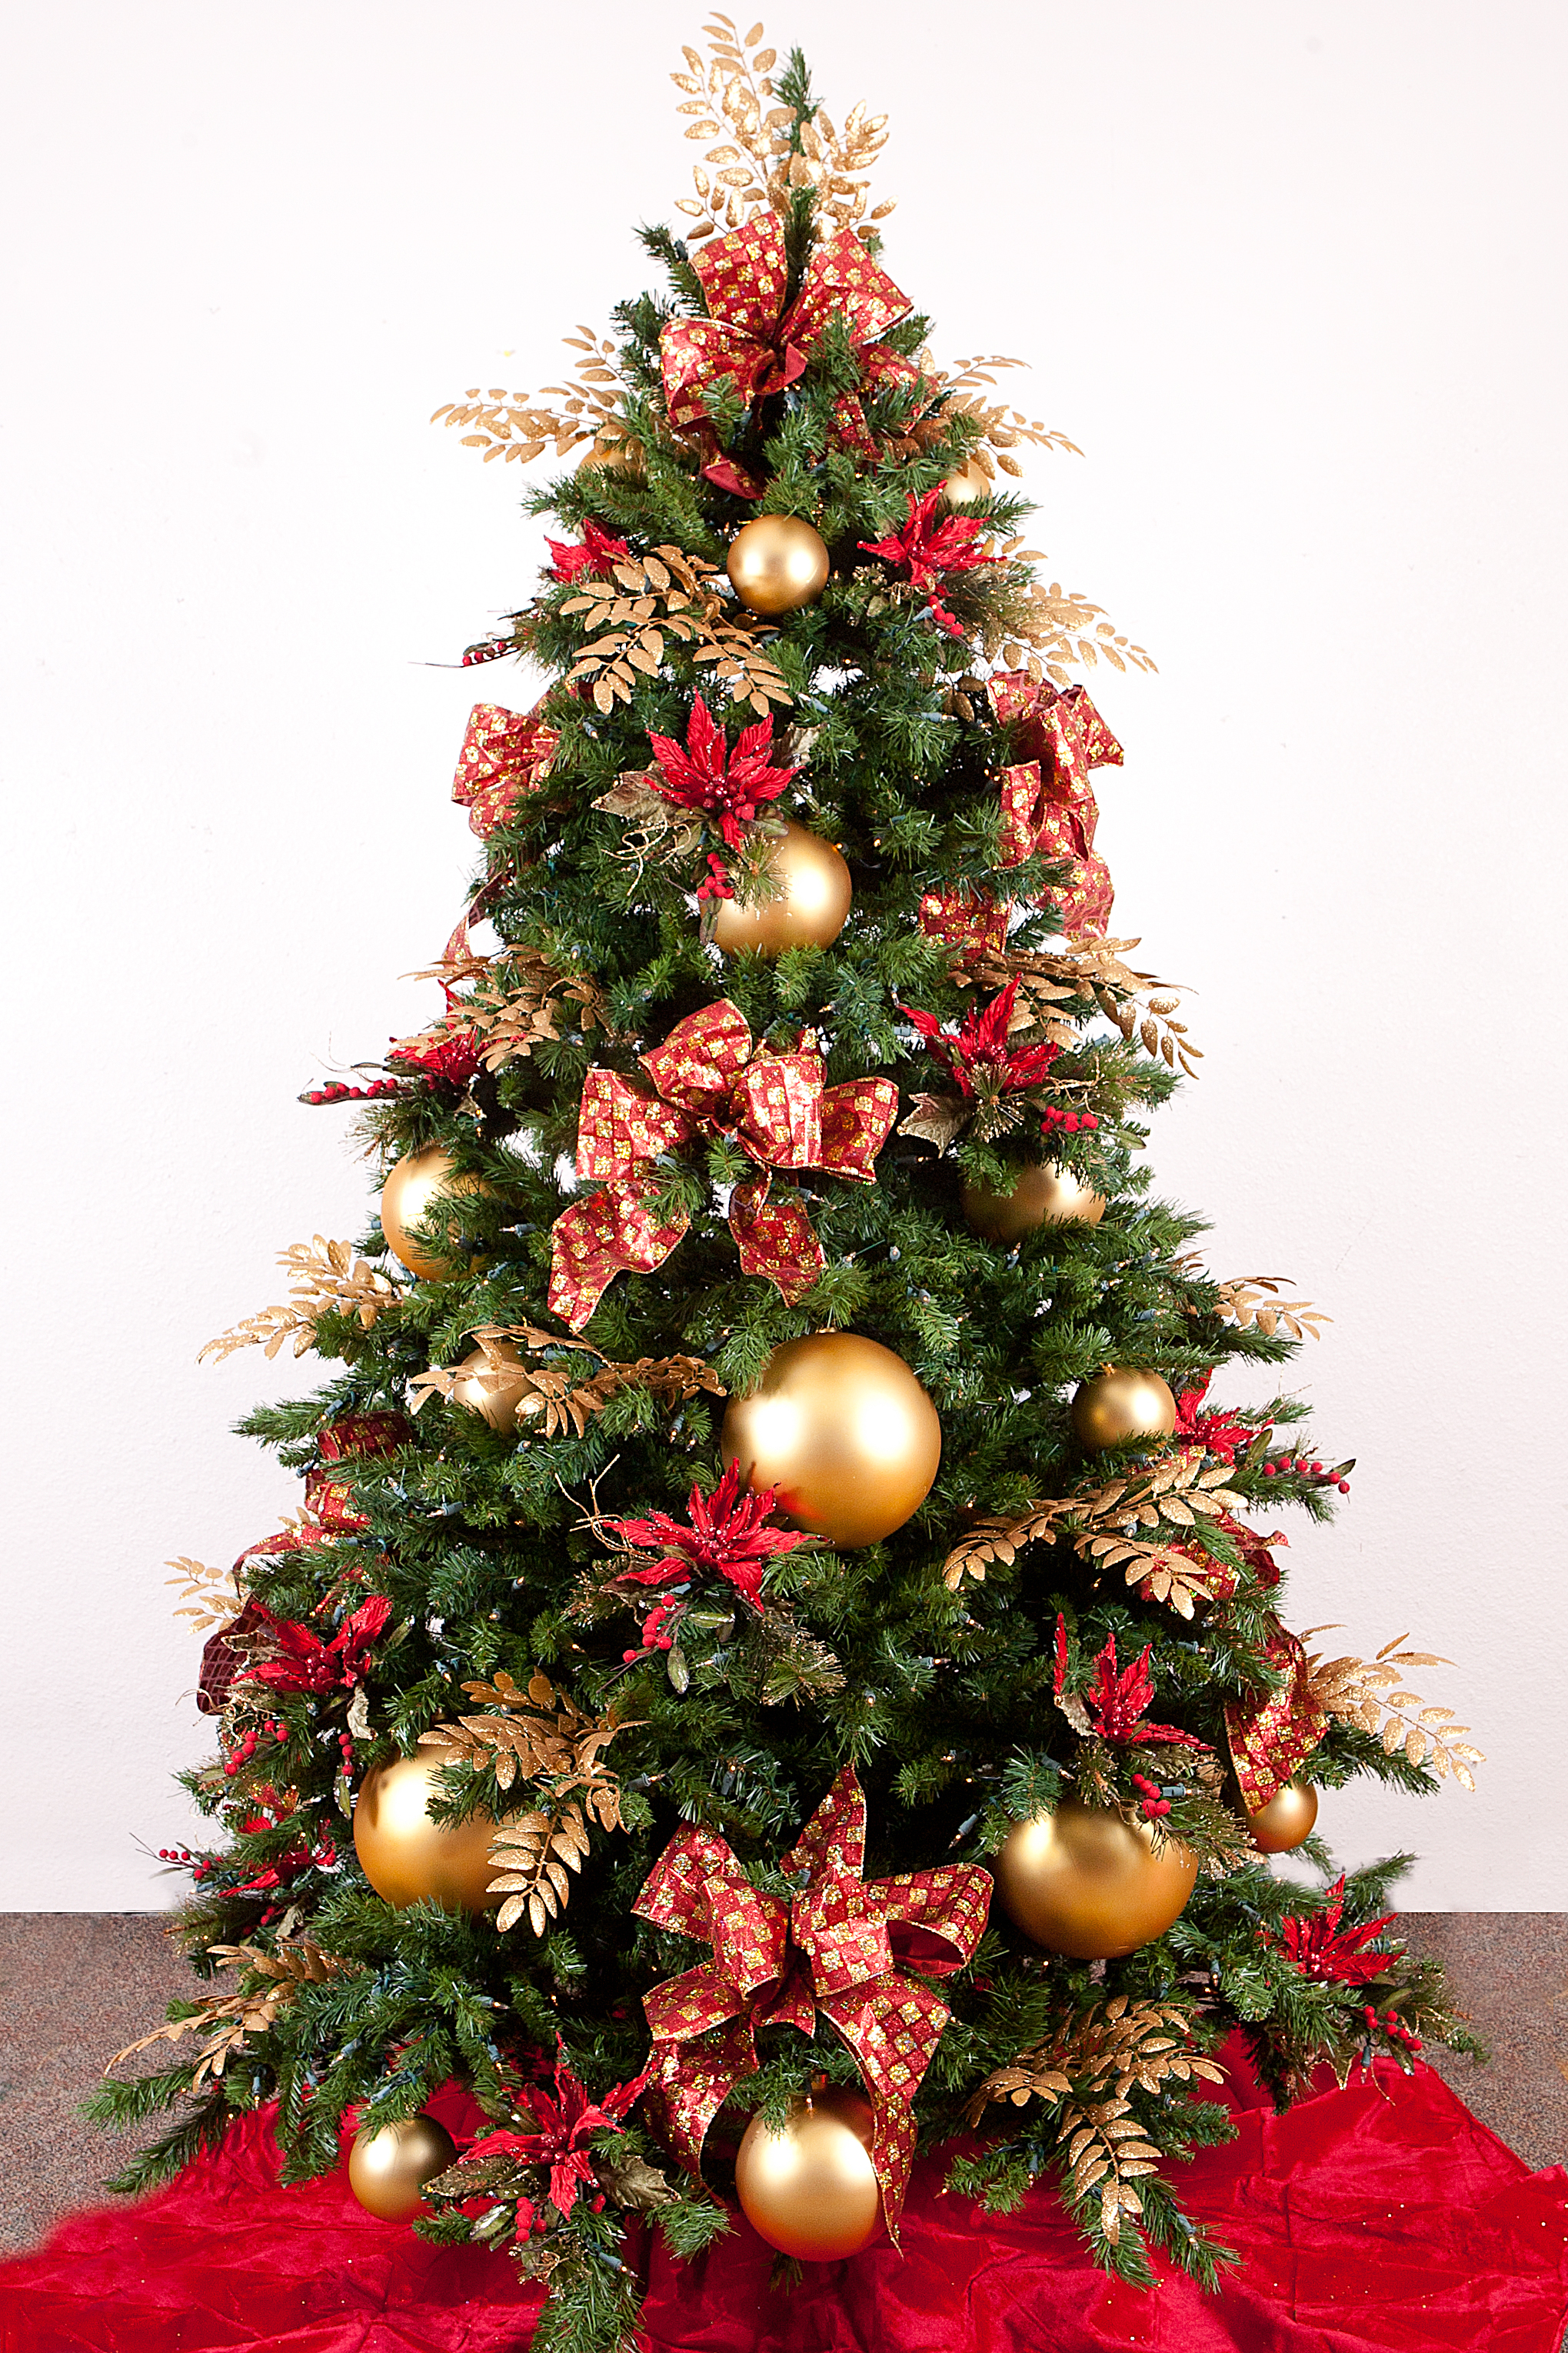 Decorated Christmas Trees Ideas